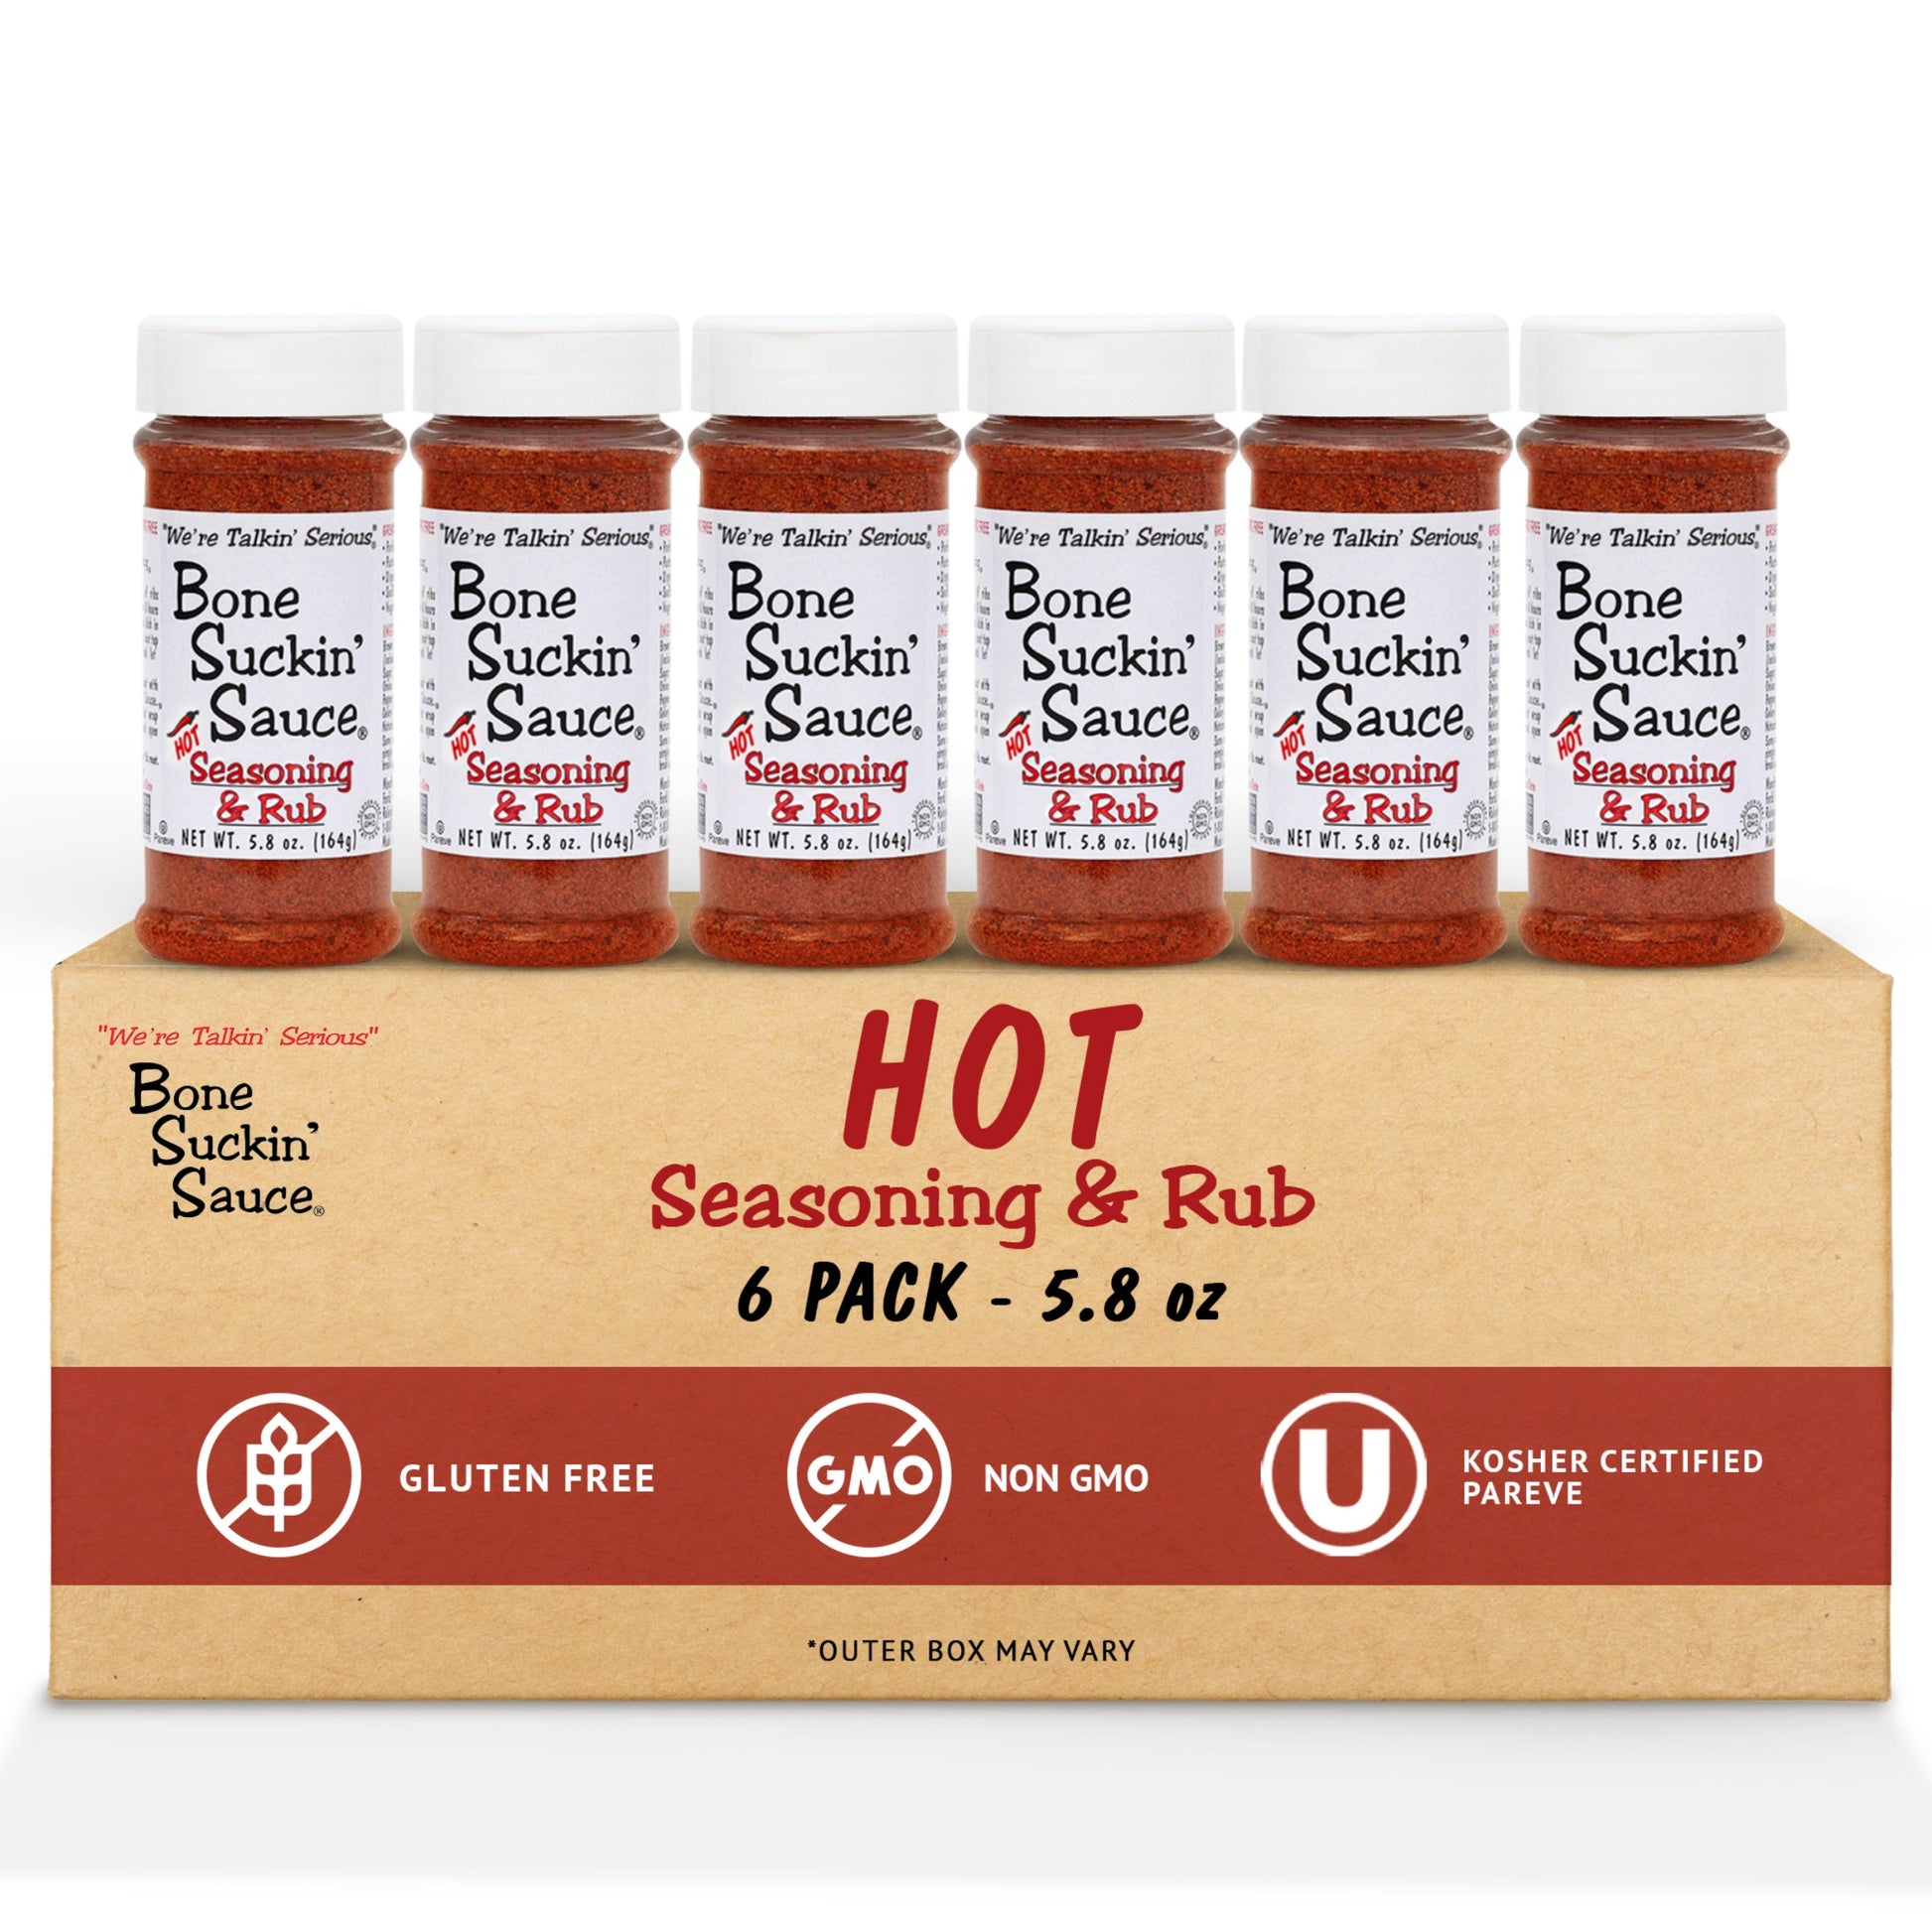 Bone Suckin’® Hot Seasoning & Rub, 5.8 oz. A cayenne kick is the perfect addition to the proprietary blend of brown sugar, paprika, garlic and spices in the original. This perfect combination of spicy, salty and sweet brings just the right amount of heat to this versatile product. Everyone can enjoy that same great flavor with a little extra spice. 6 pack